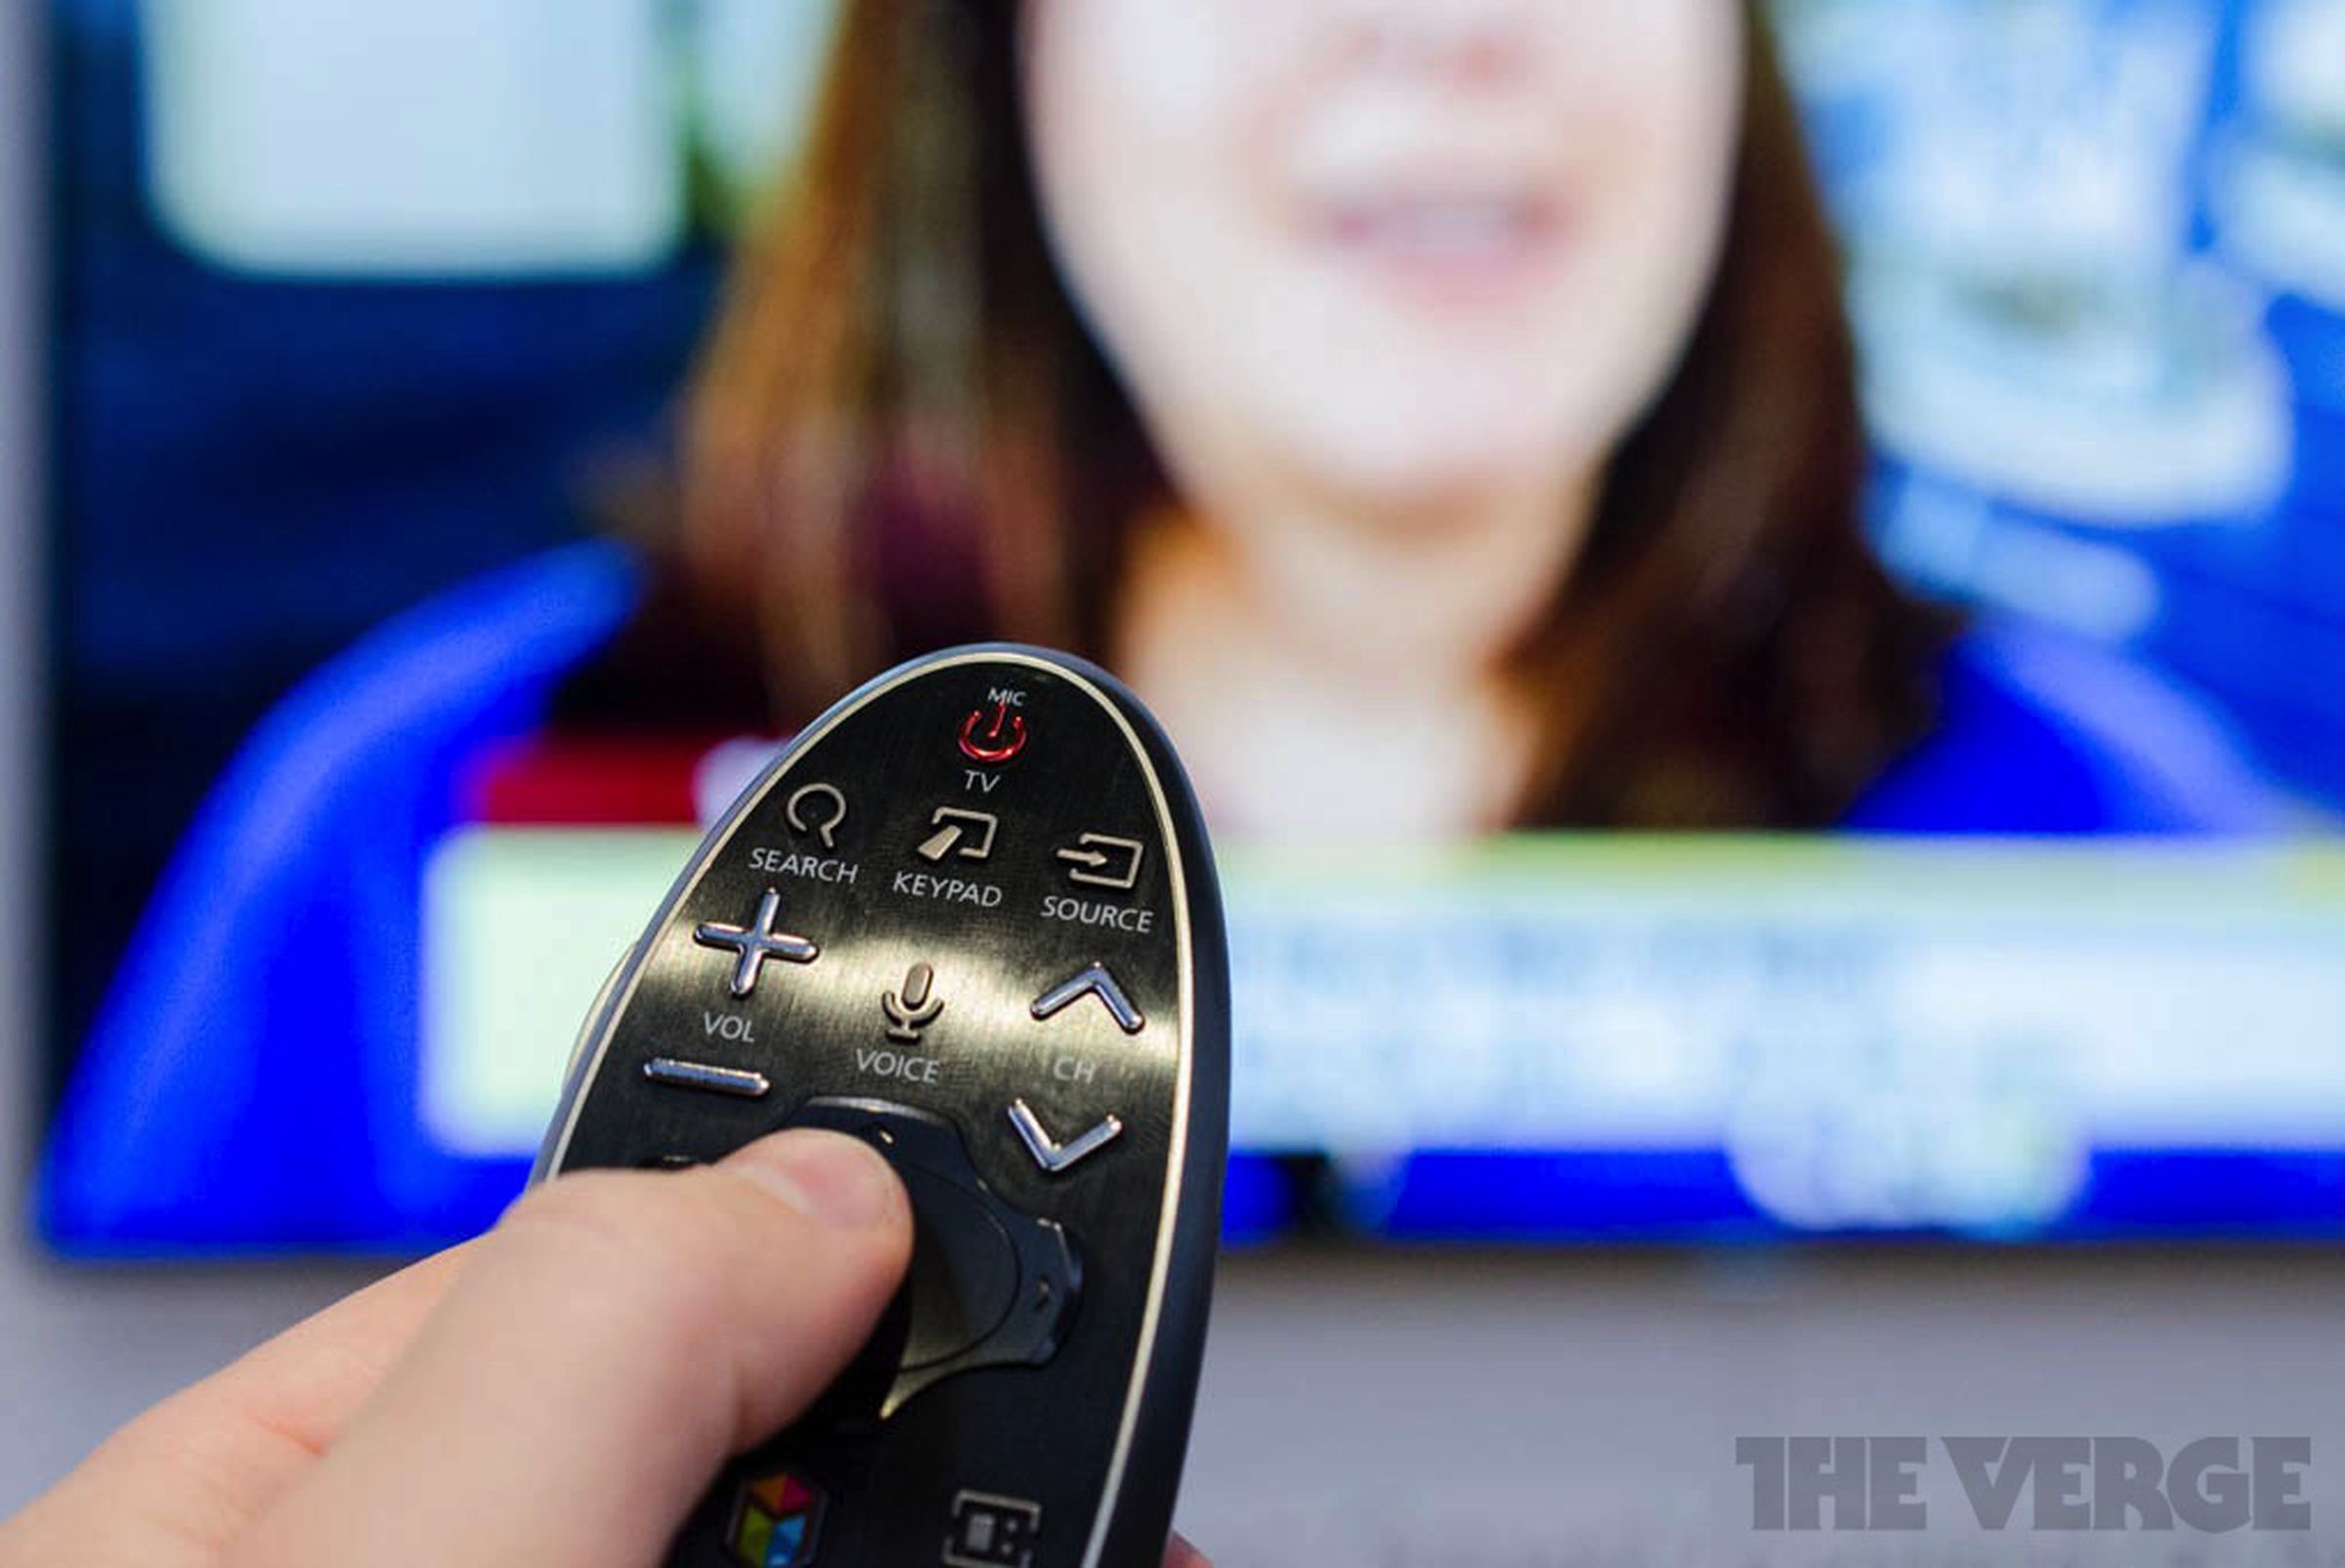 Samsung's new Smart control TV remote with gesture control